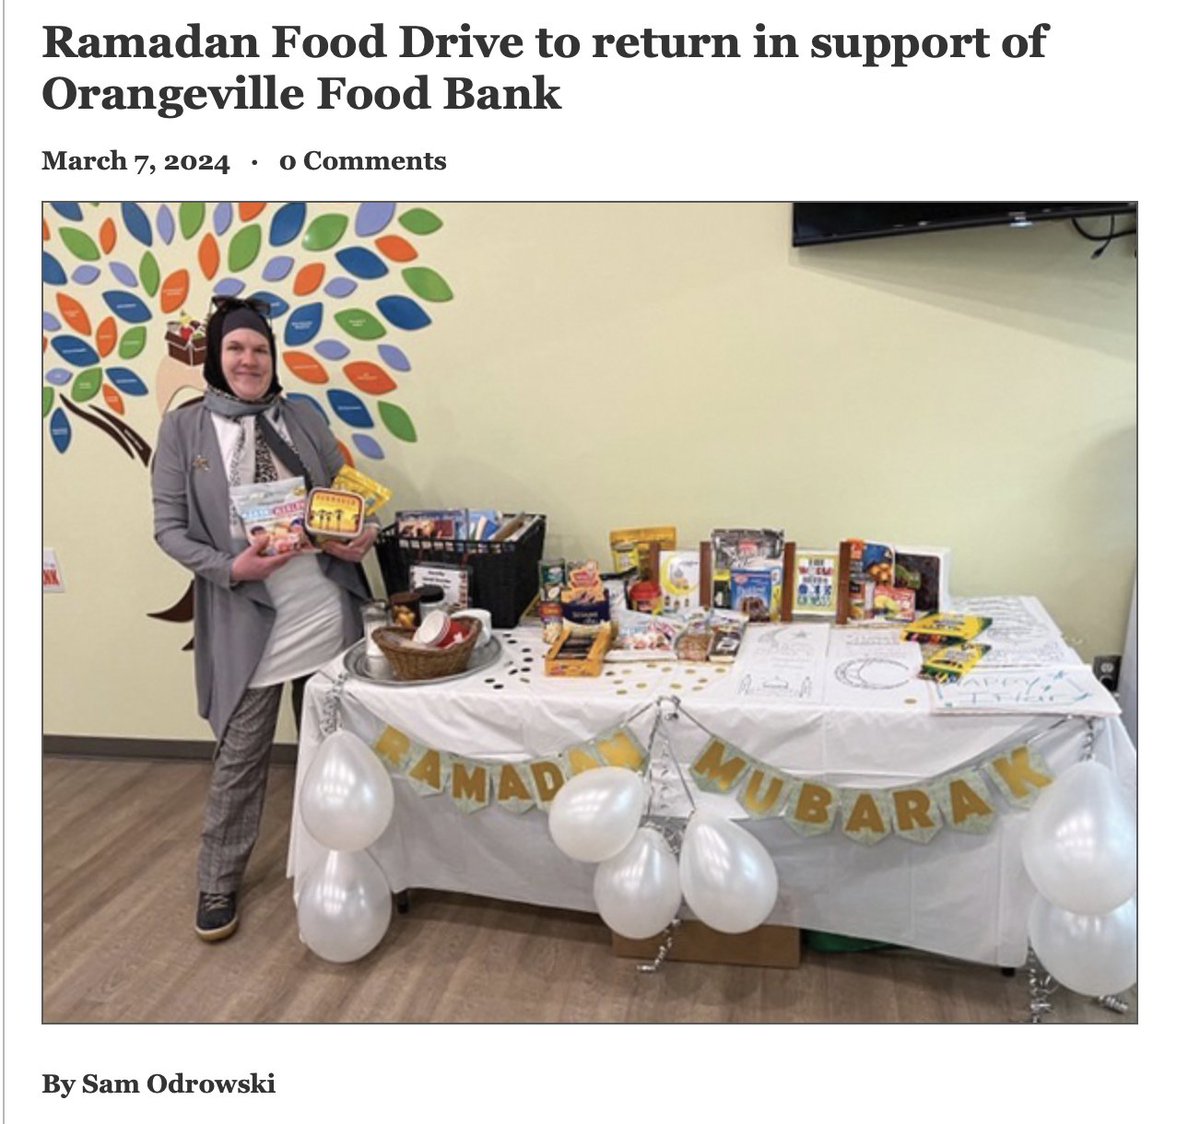 'Ramadan Food Drive to return in support of Orangeville Food Bank' - article can be found in the Orangeville Citizen both in the paper and online. Thank you Sam Odrowski for the photo and story. #Ramadan #FoodDrive #Orangeville #DufferinCounty